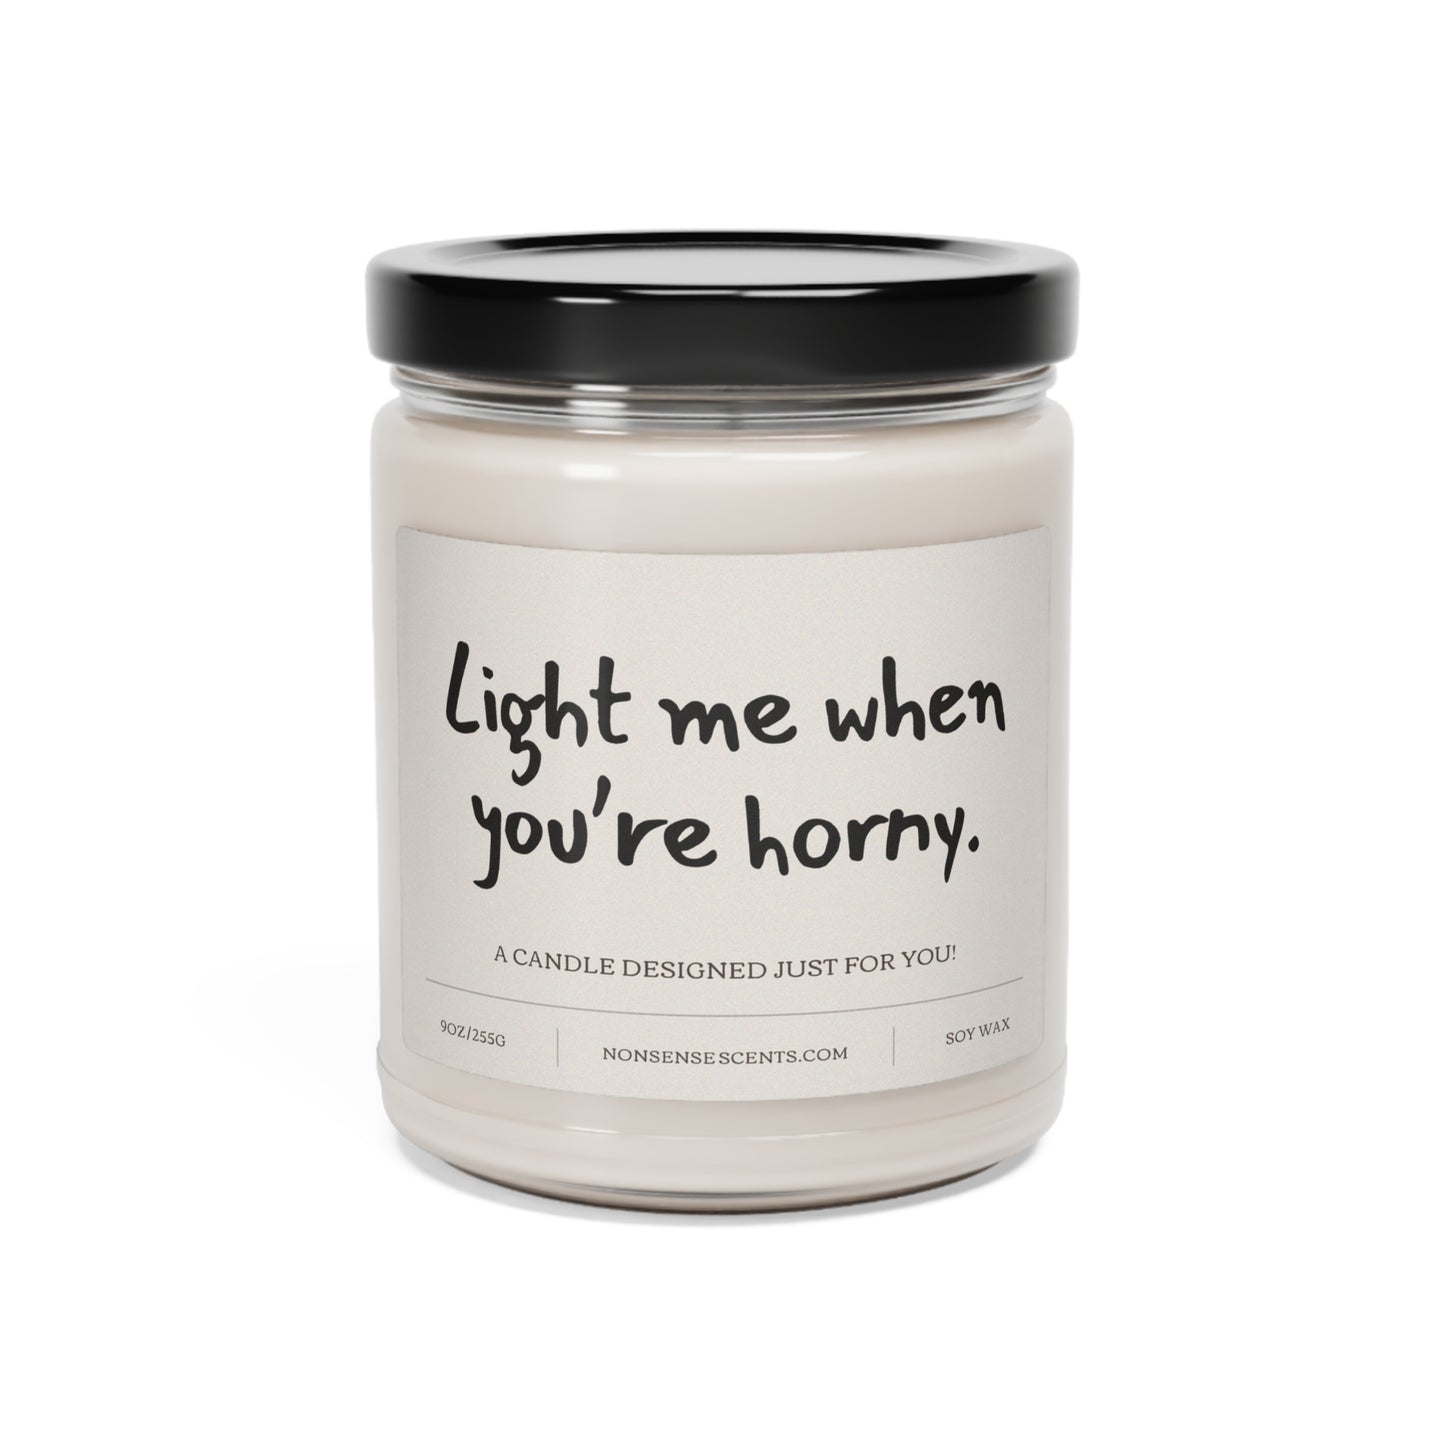 "Light Me When You're Horny!" Scented Candle